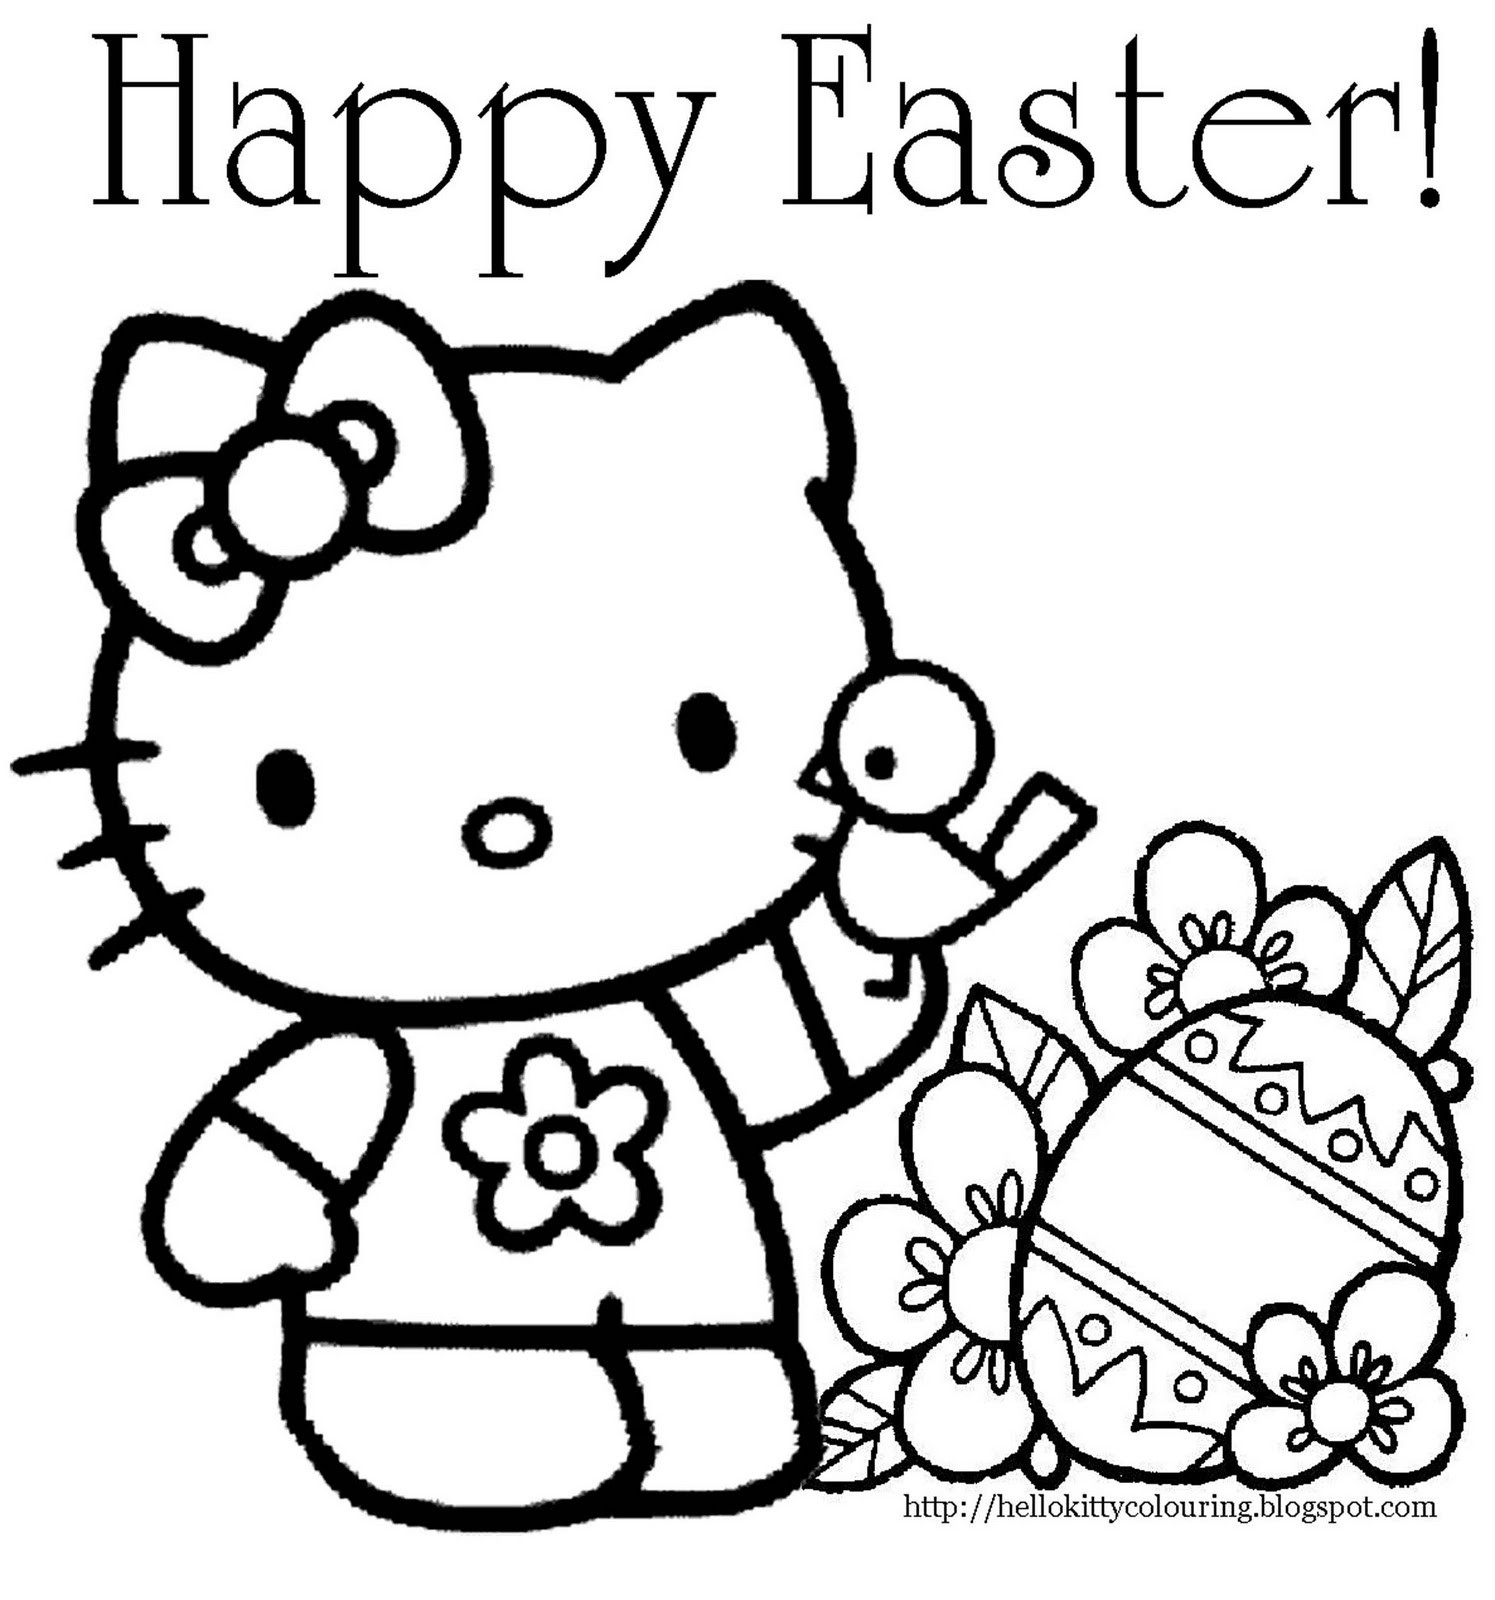 Coloring Pages Easter Printable
 EASTER COLOURING MISCELLANEOUS EASTER COLOURING PAGES